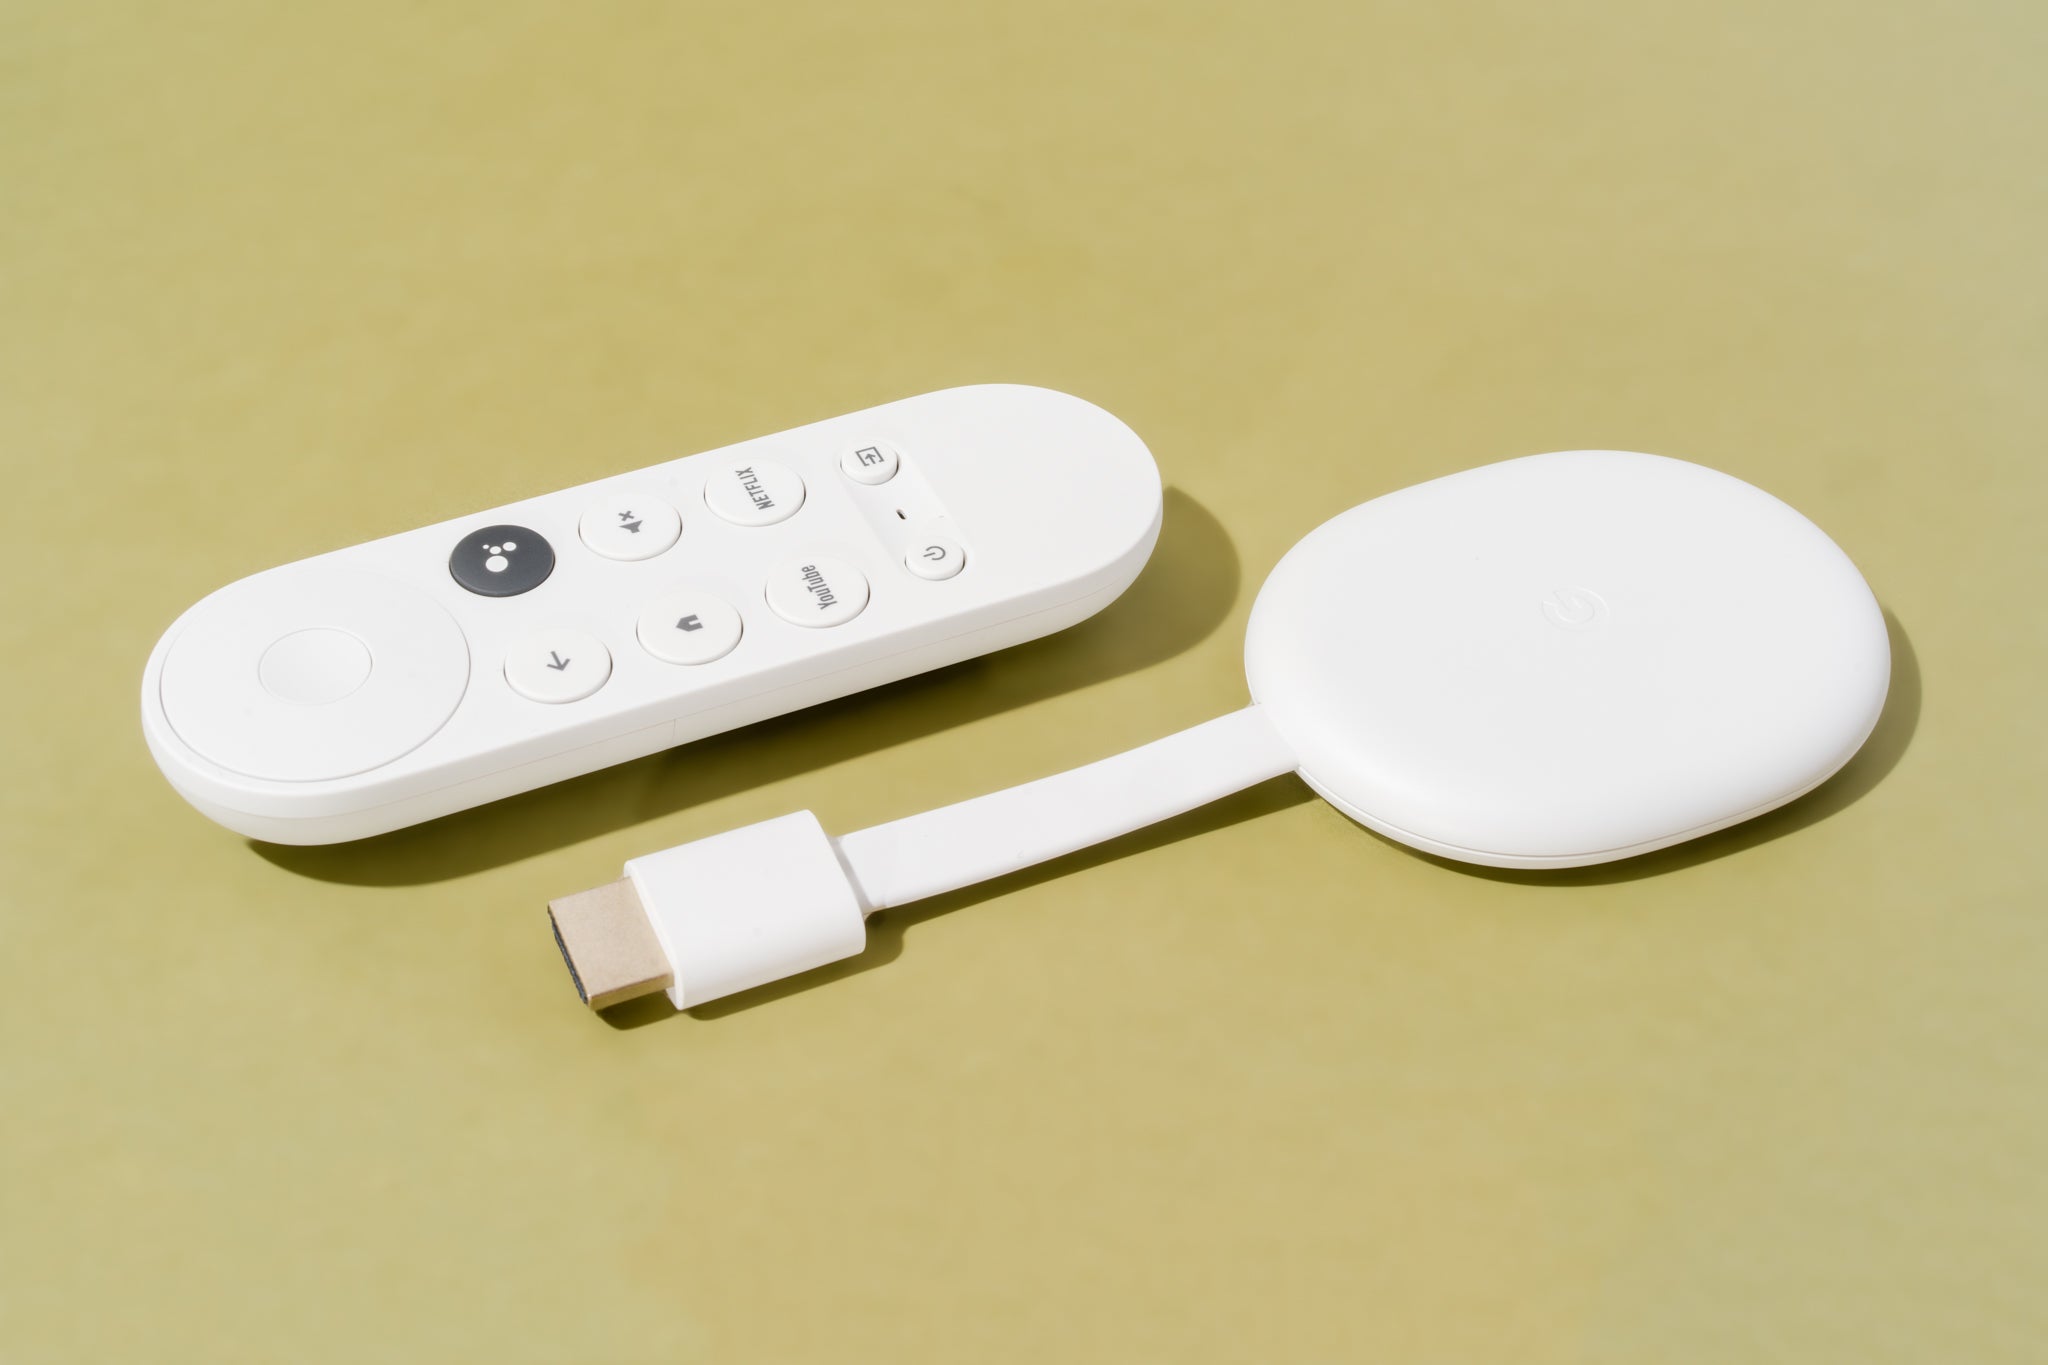 Exploring The AirPlay Chromecast: A Comparison Of Wireless Streaming Options